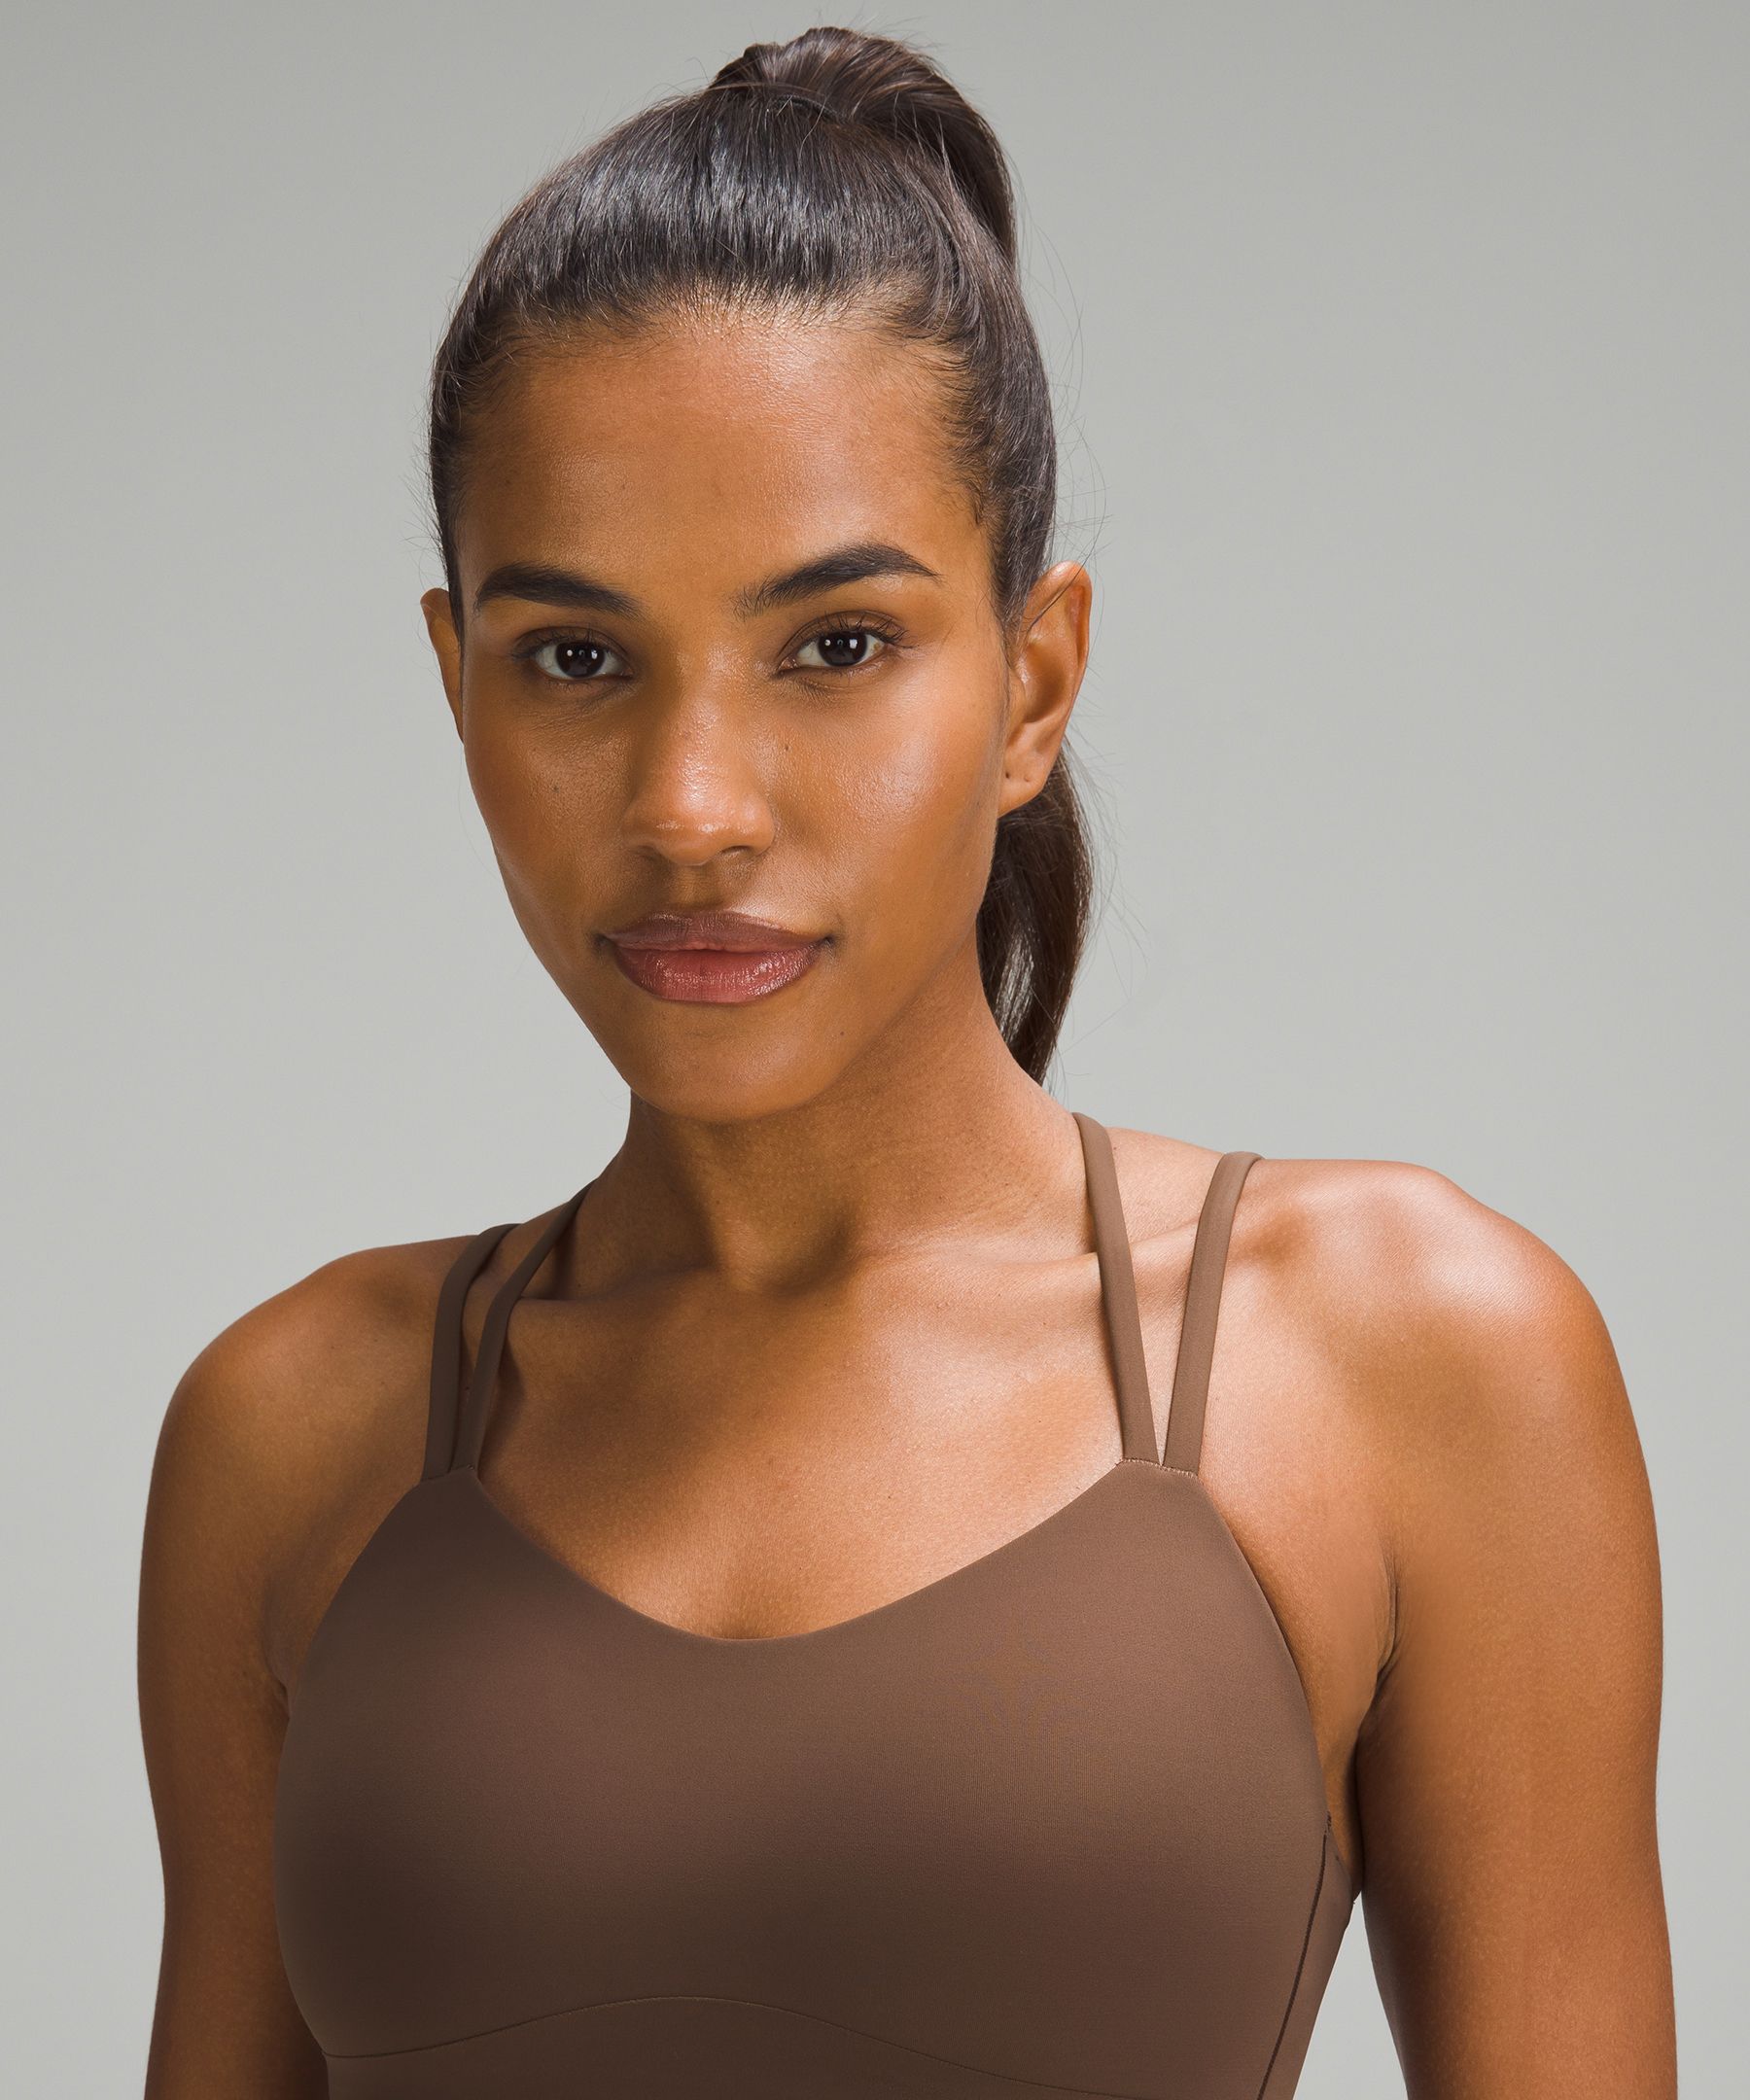 Lululemon in alignment longline bra Size 4 Condition: perfect Color: smoked  spruce Details : - Has padding - Comfy